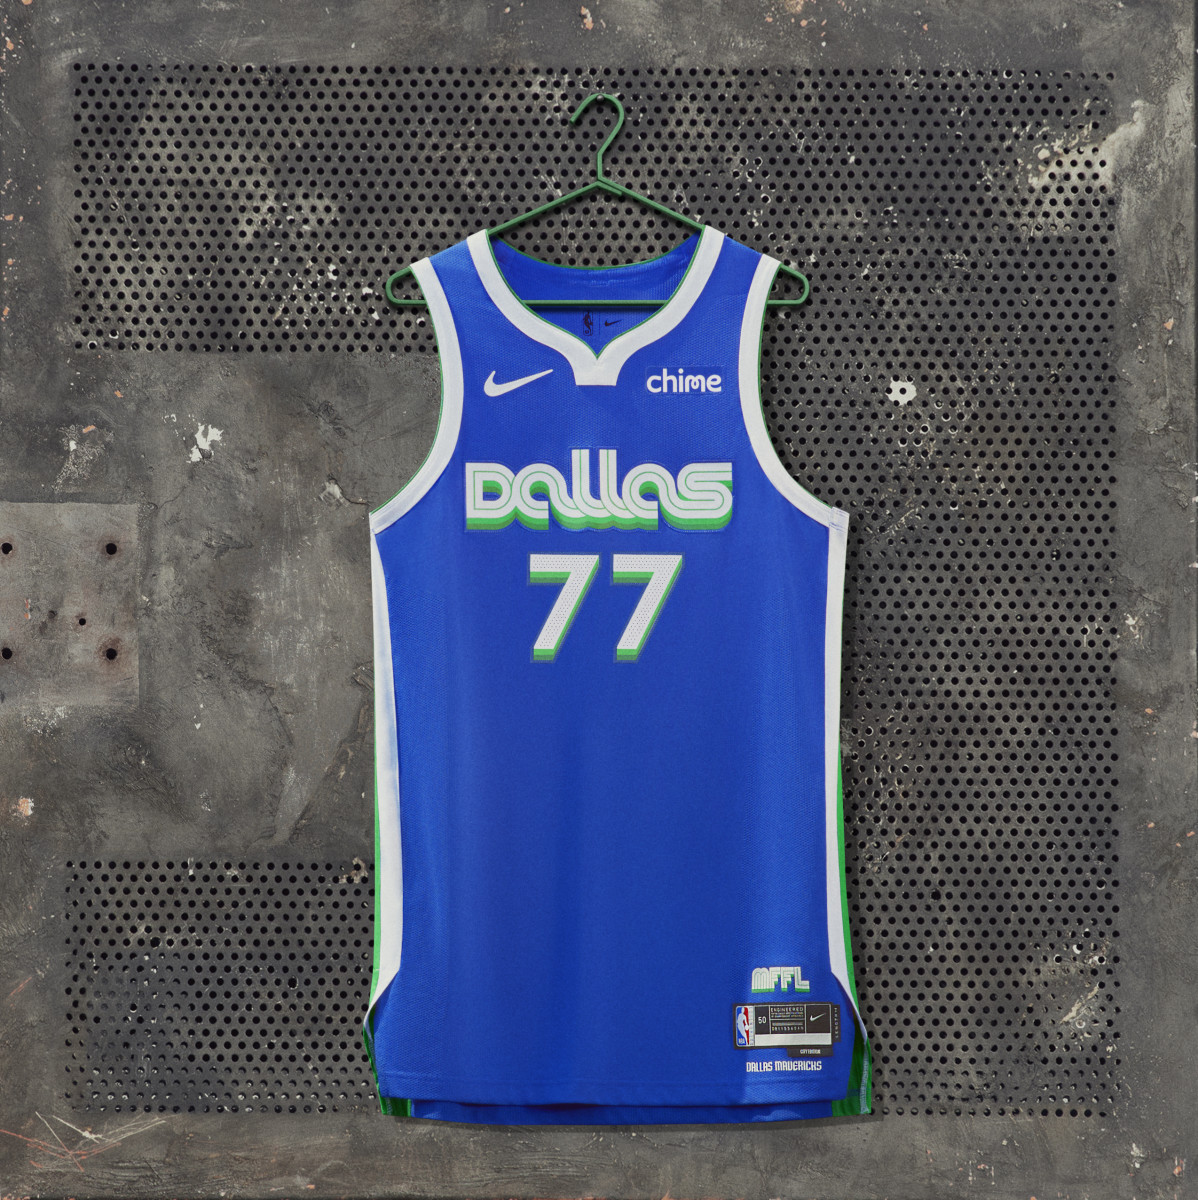 Ranking every 'City Edition' jersey: The good, the bad, and the Mavs